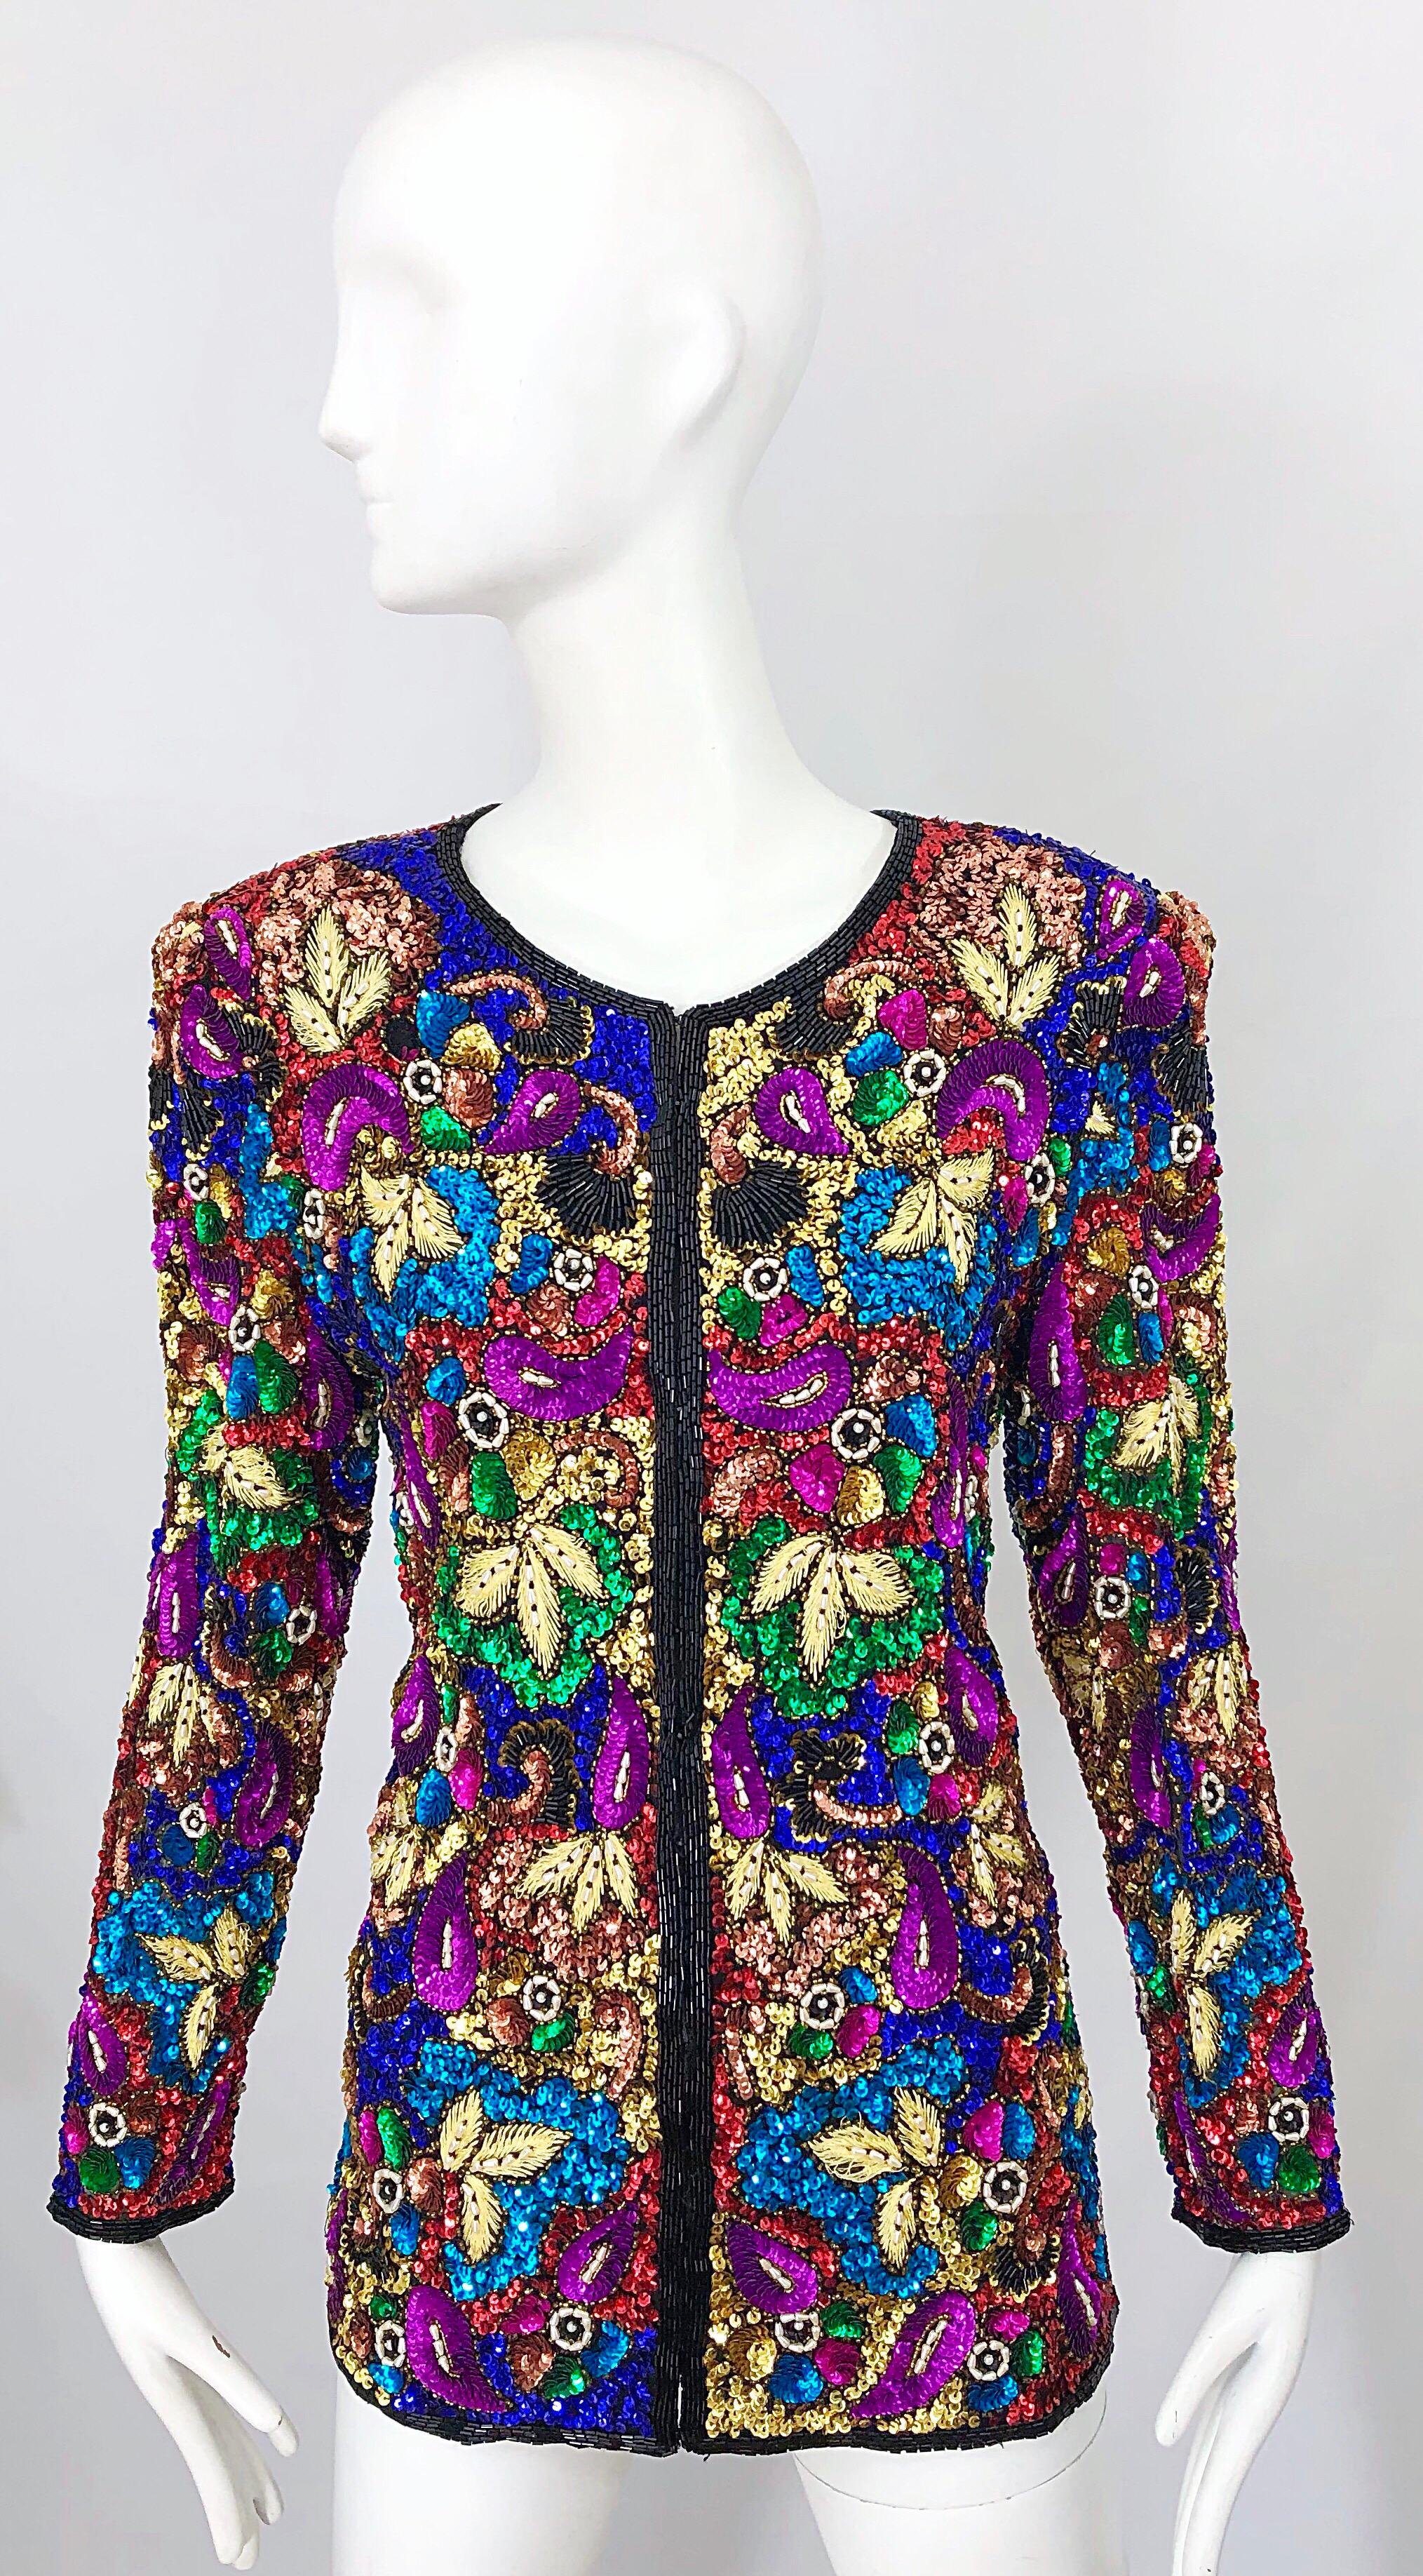 Wonderful vintage 90s SWEE LO fully sequined, beaded and pearl encrusted stained glass silk jacket! Features thousands of hand-sewn sequins, beads and pearls throughout. Hidden hook-and-eye closures up the front. Literally every color in the rainbow